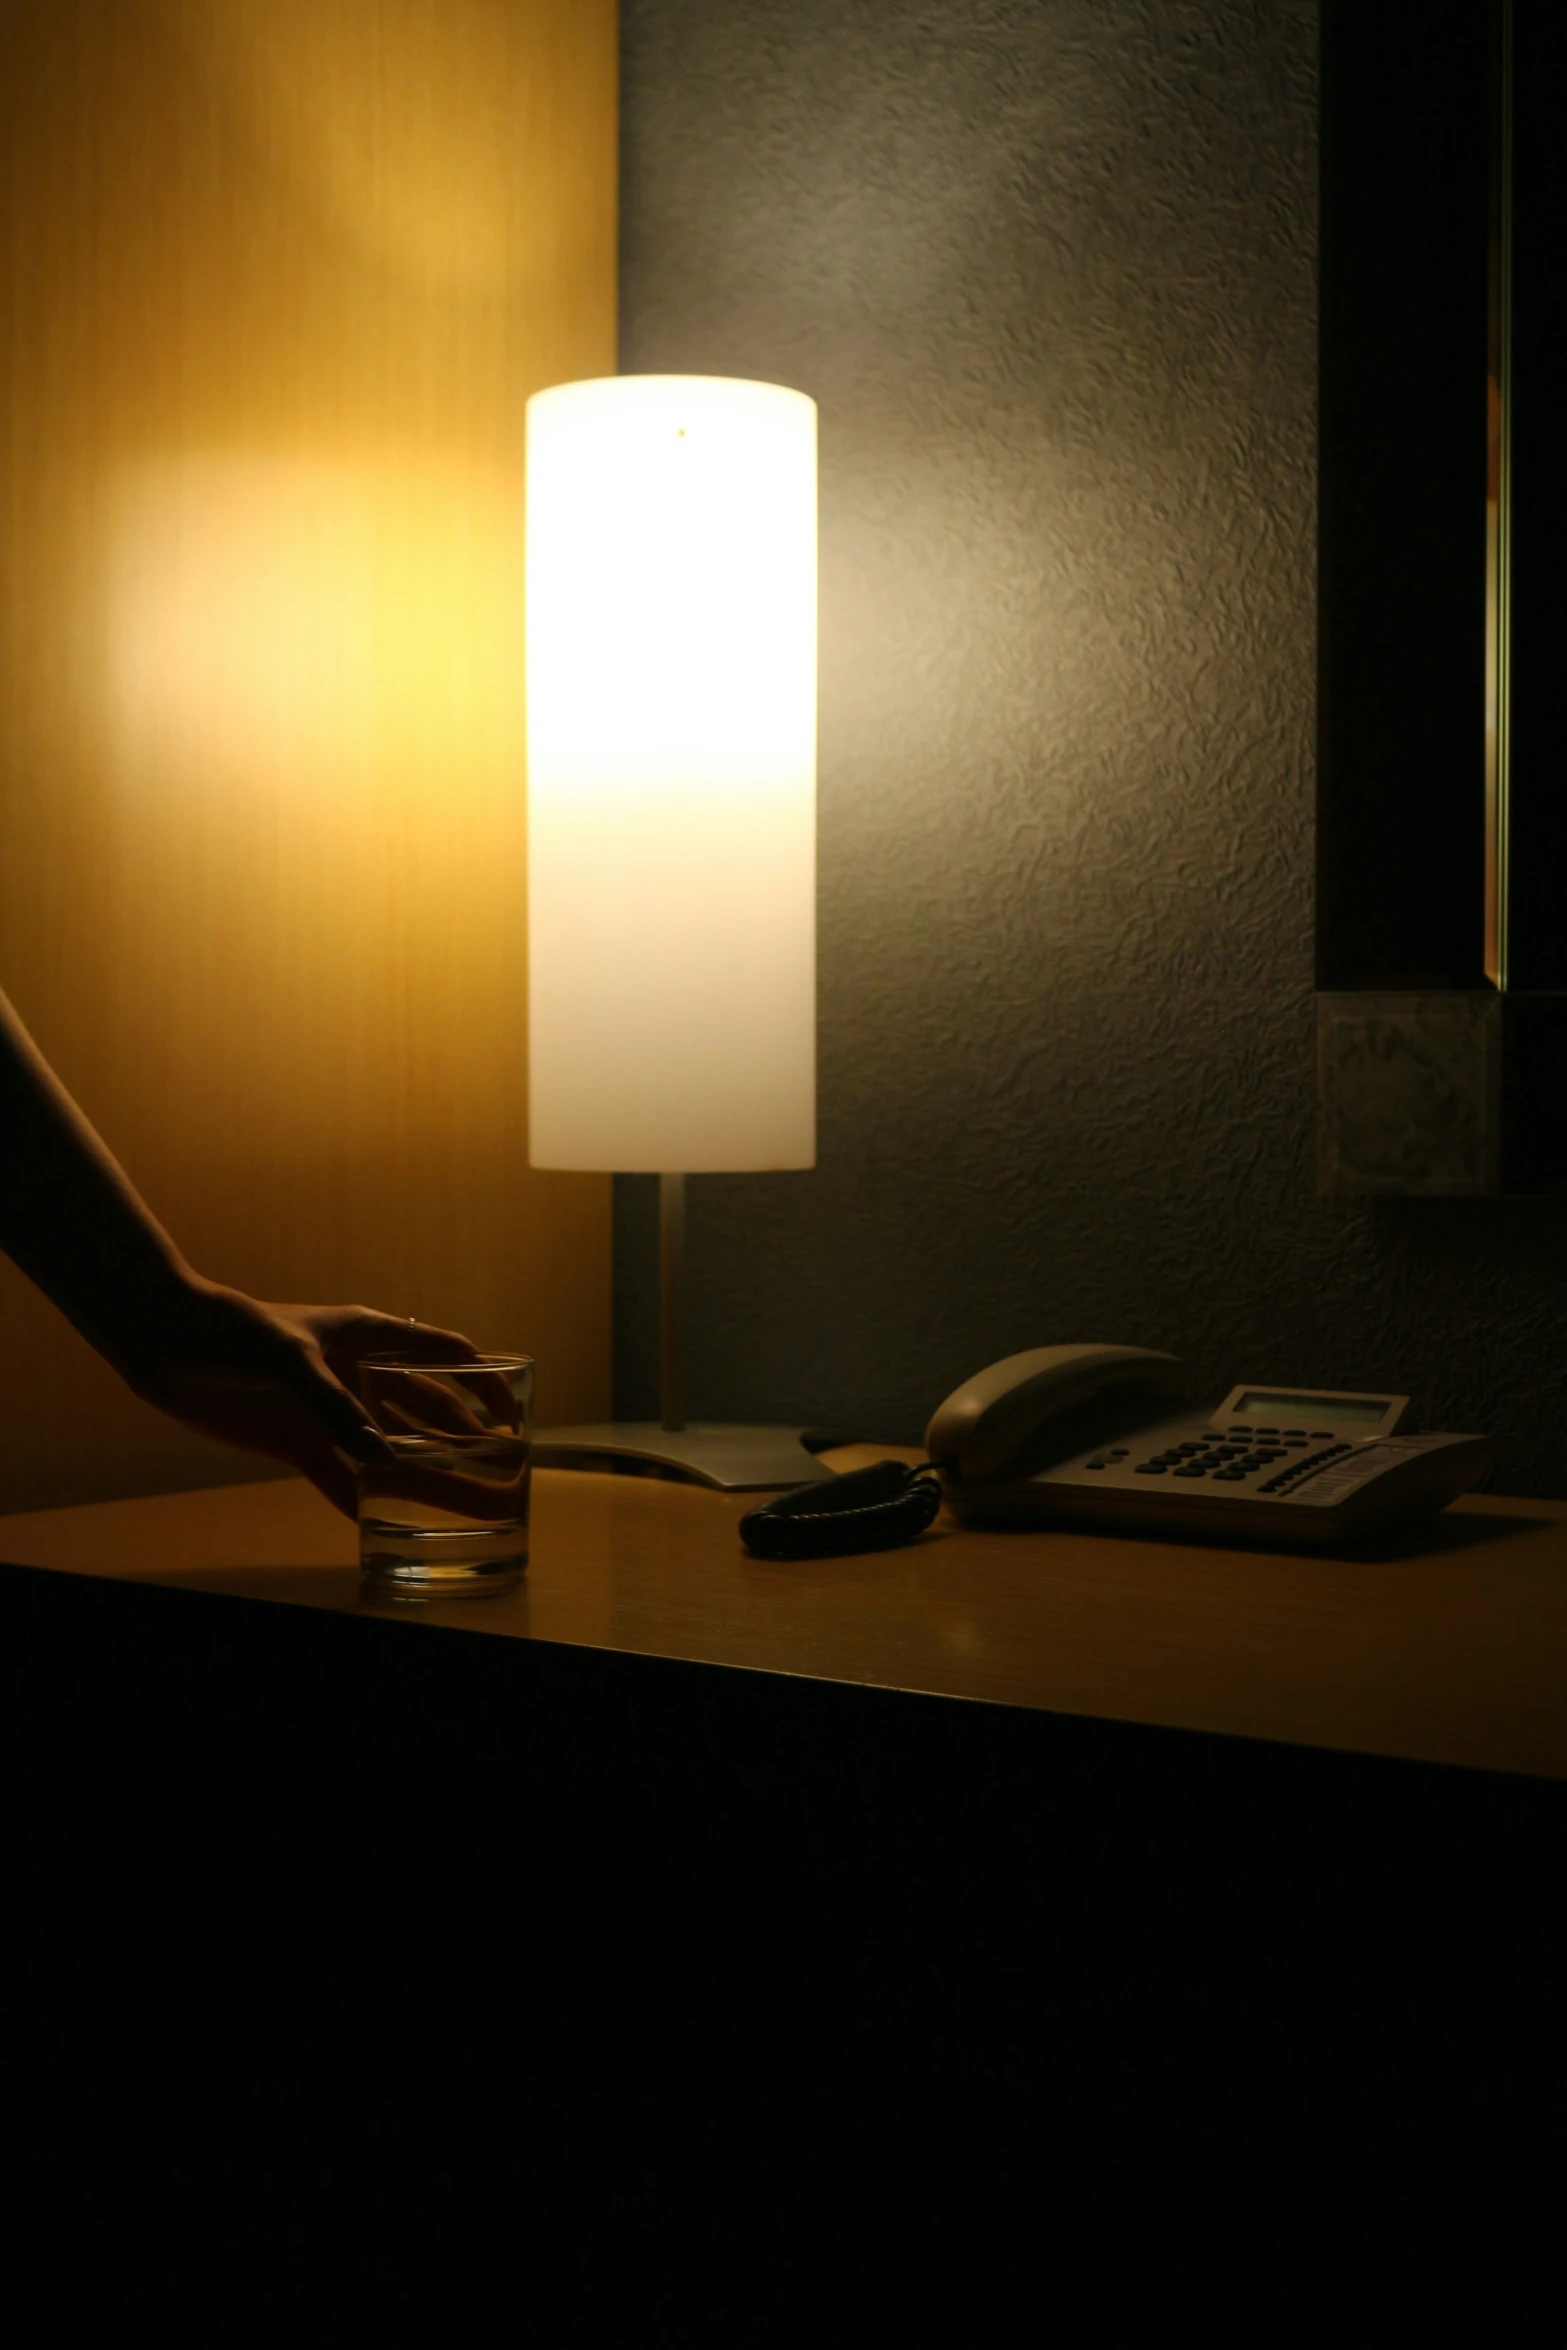 a small, hand lamp in a darkened room